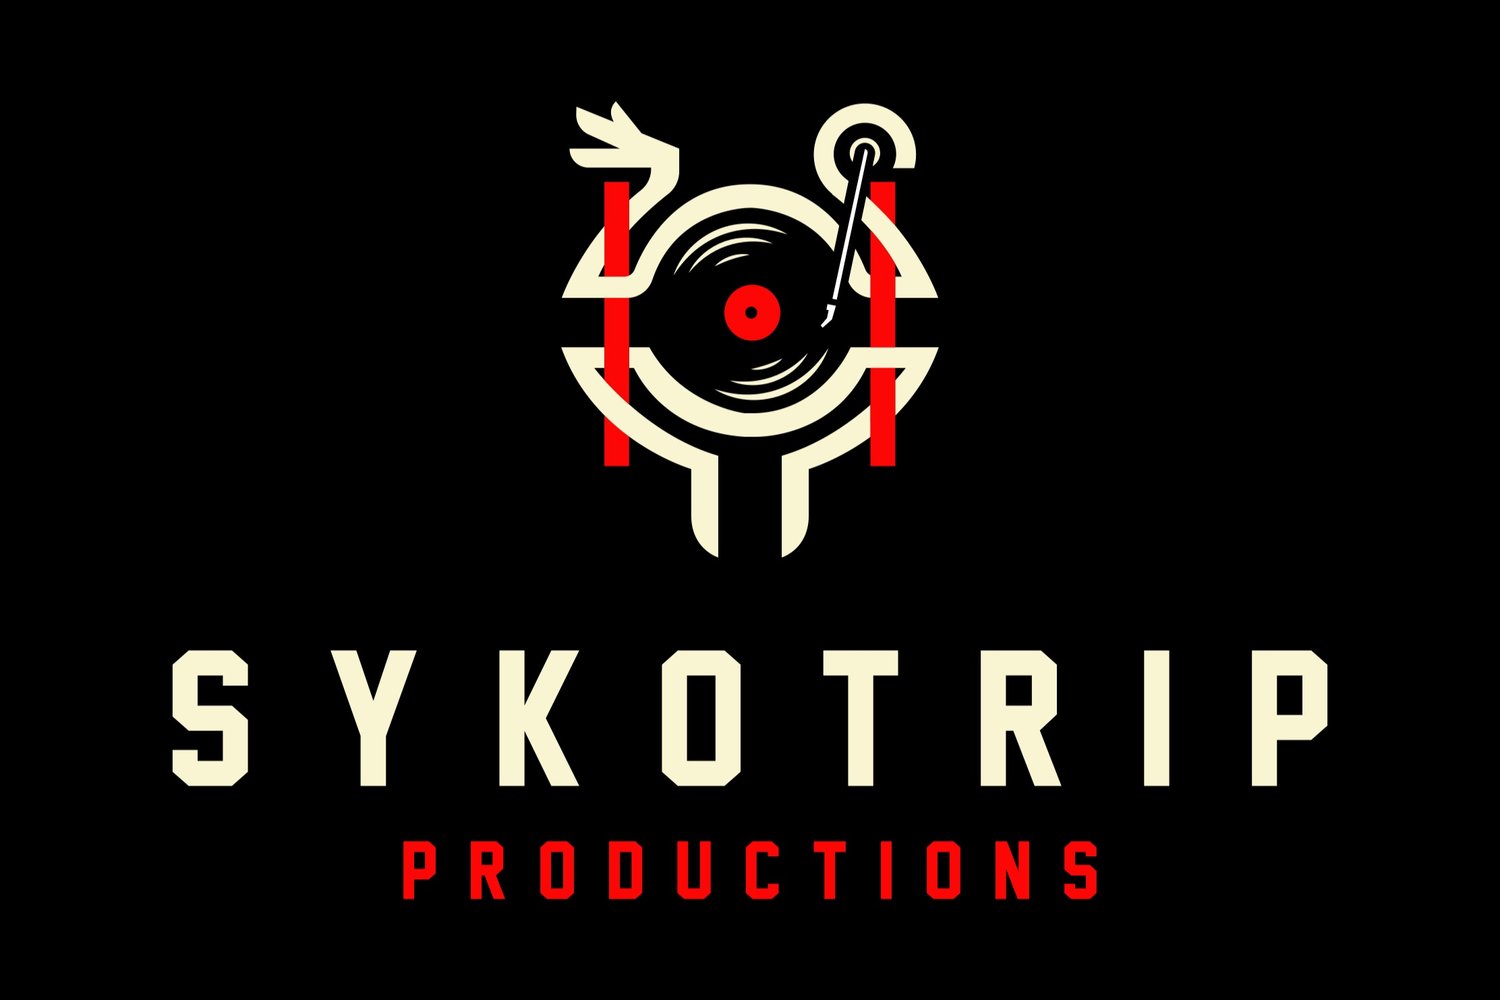 SykoTrip Productions